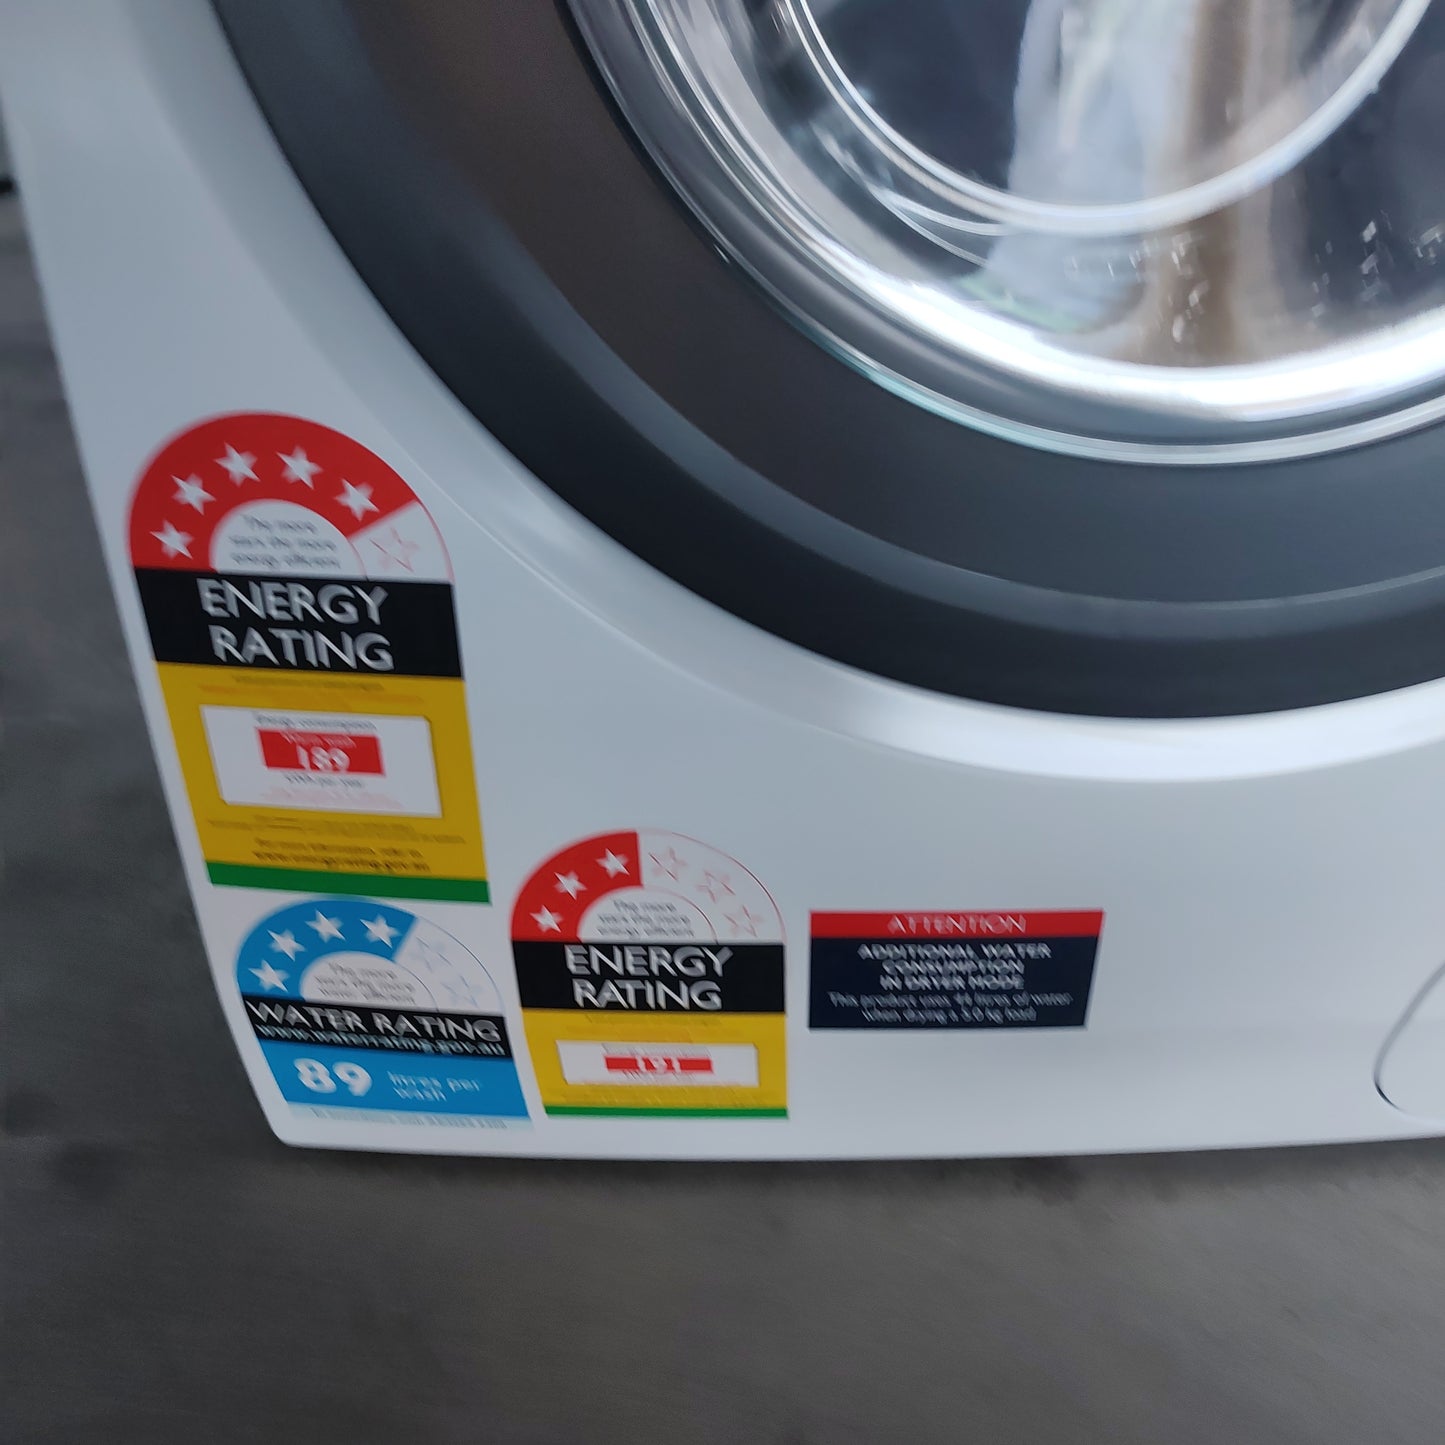 Westinghouse 9kg/5kg Combo Front Load Washer and Dryer WWW9024M5WA